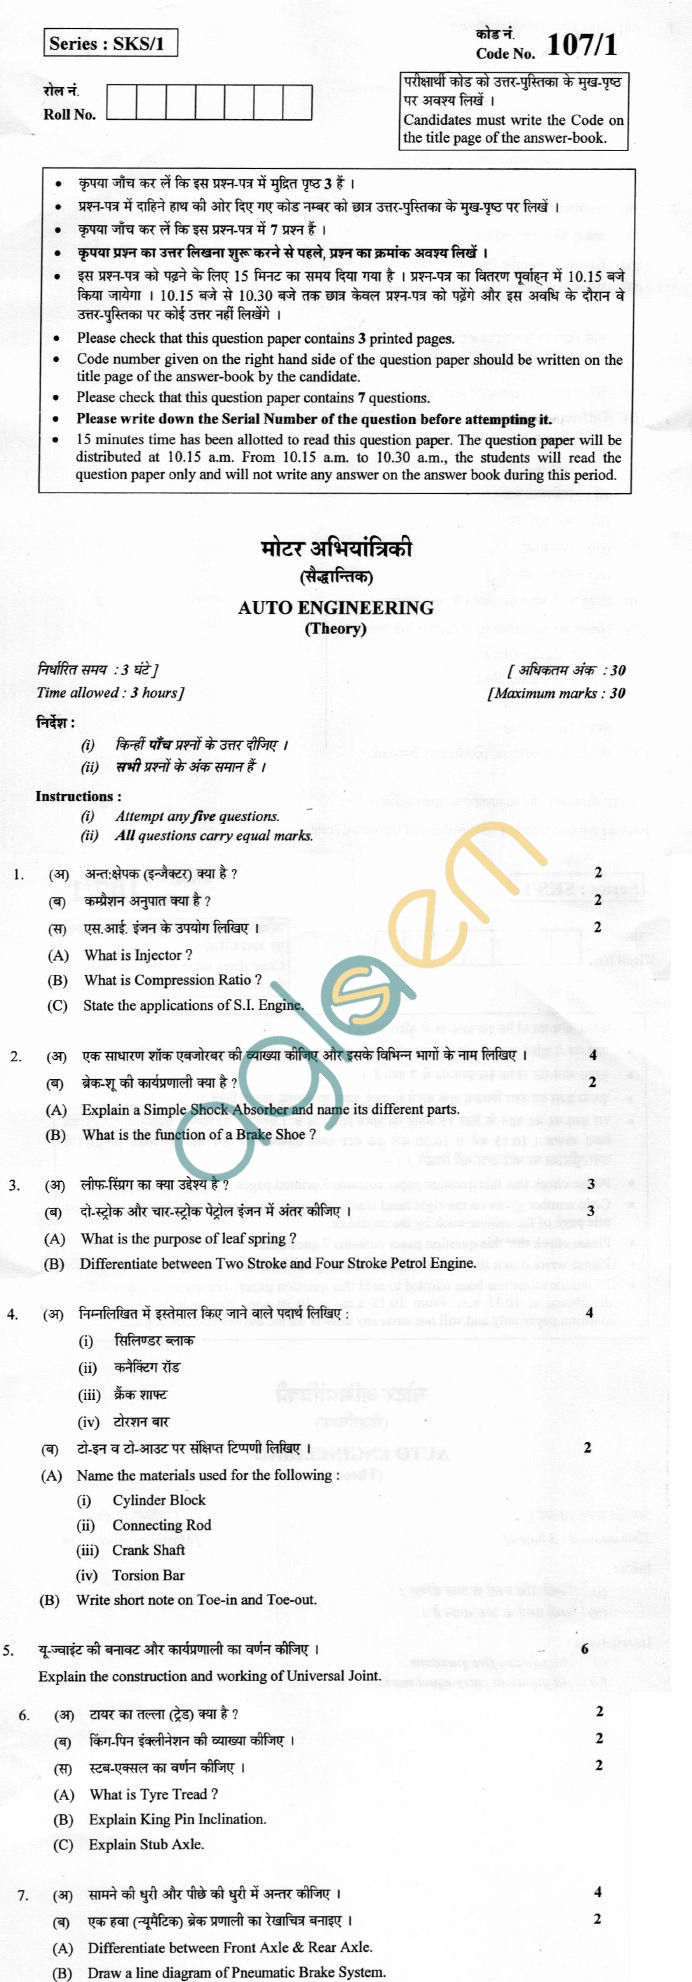 CBSE Board Exam 2013 Class XII Question Paper - Auto Engineering